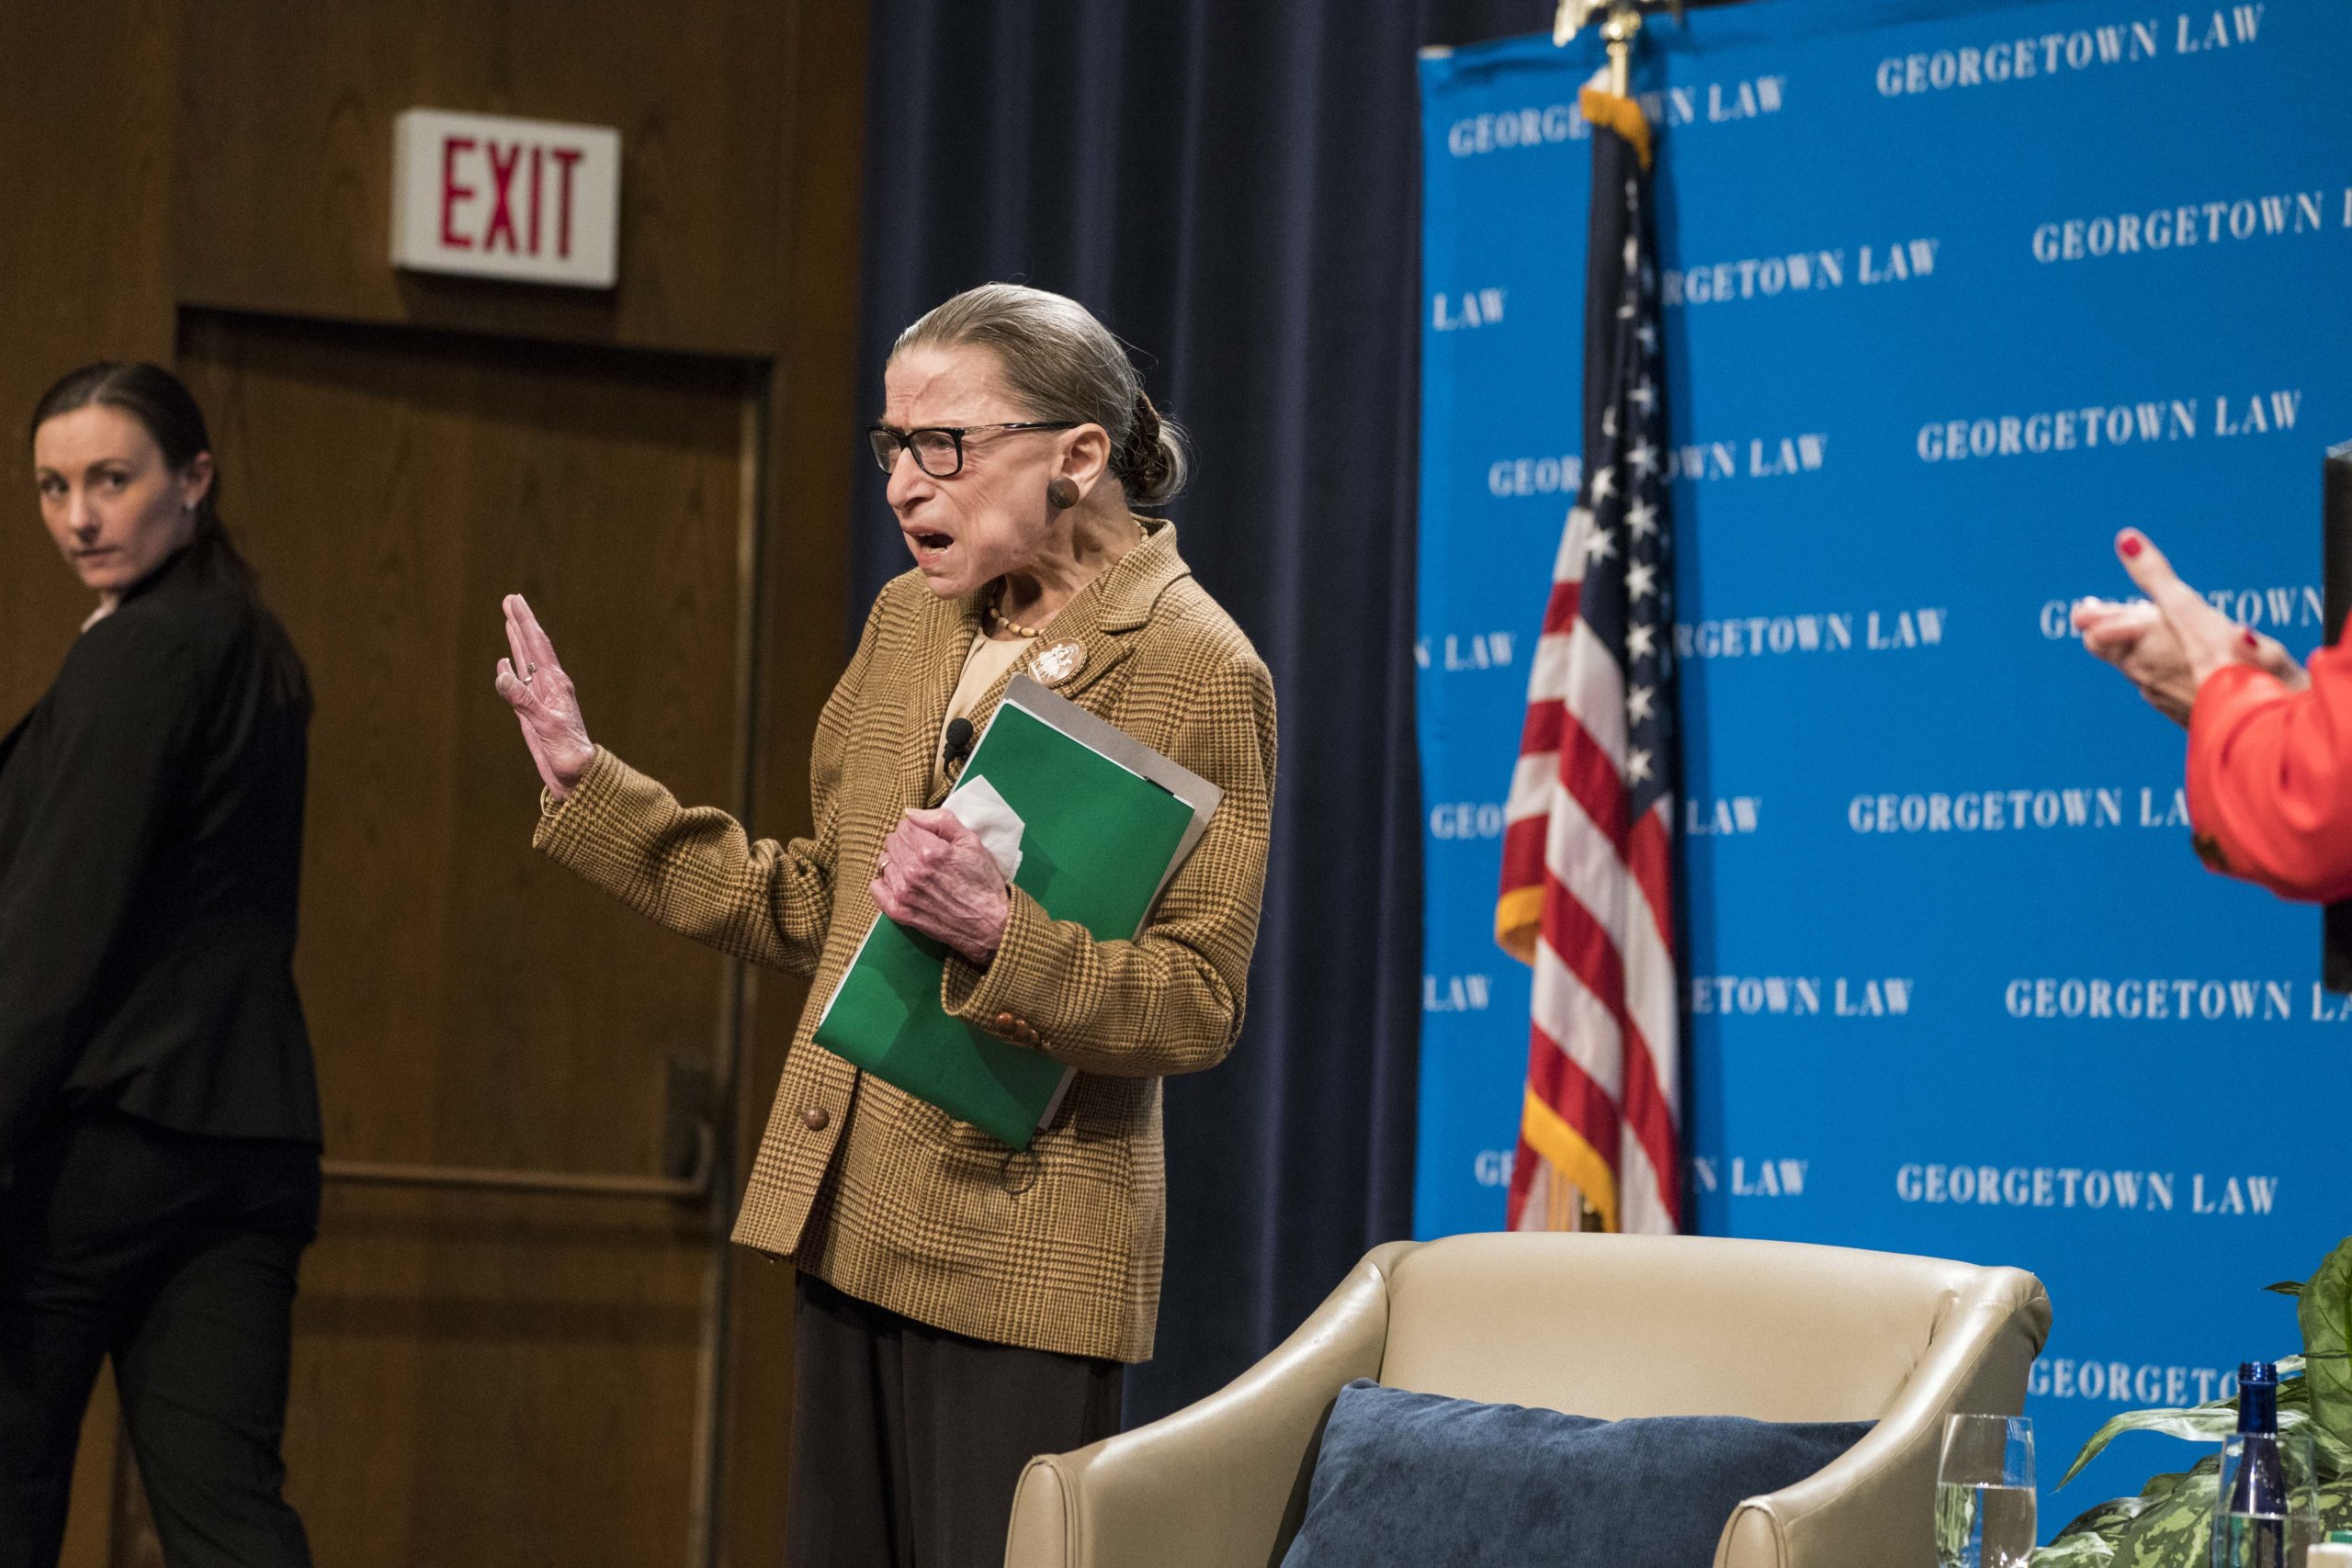 WASHINGTON, DC - FEBRUARY 10: U.S. Supreme Court Justice Ruth Bader Ginsburg takes the stage for a discussion at the Georgetown University Law Center on February 10, 2020 in Washington, DC. Justice Ginsburg and U.S. Appeals Court Judge McKeown discussed the 19th Amendment which guaranteed women the right to vote which was passed 100 years ago. (Photo by Sarah Silbiger/Getty Images)